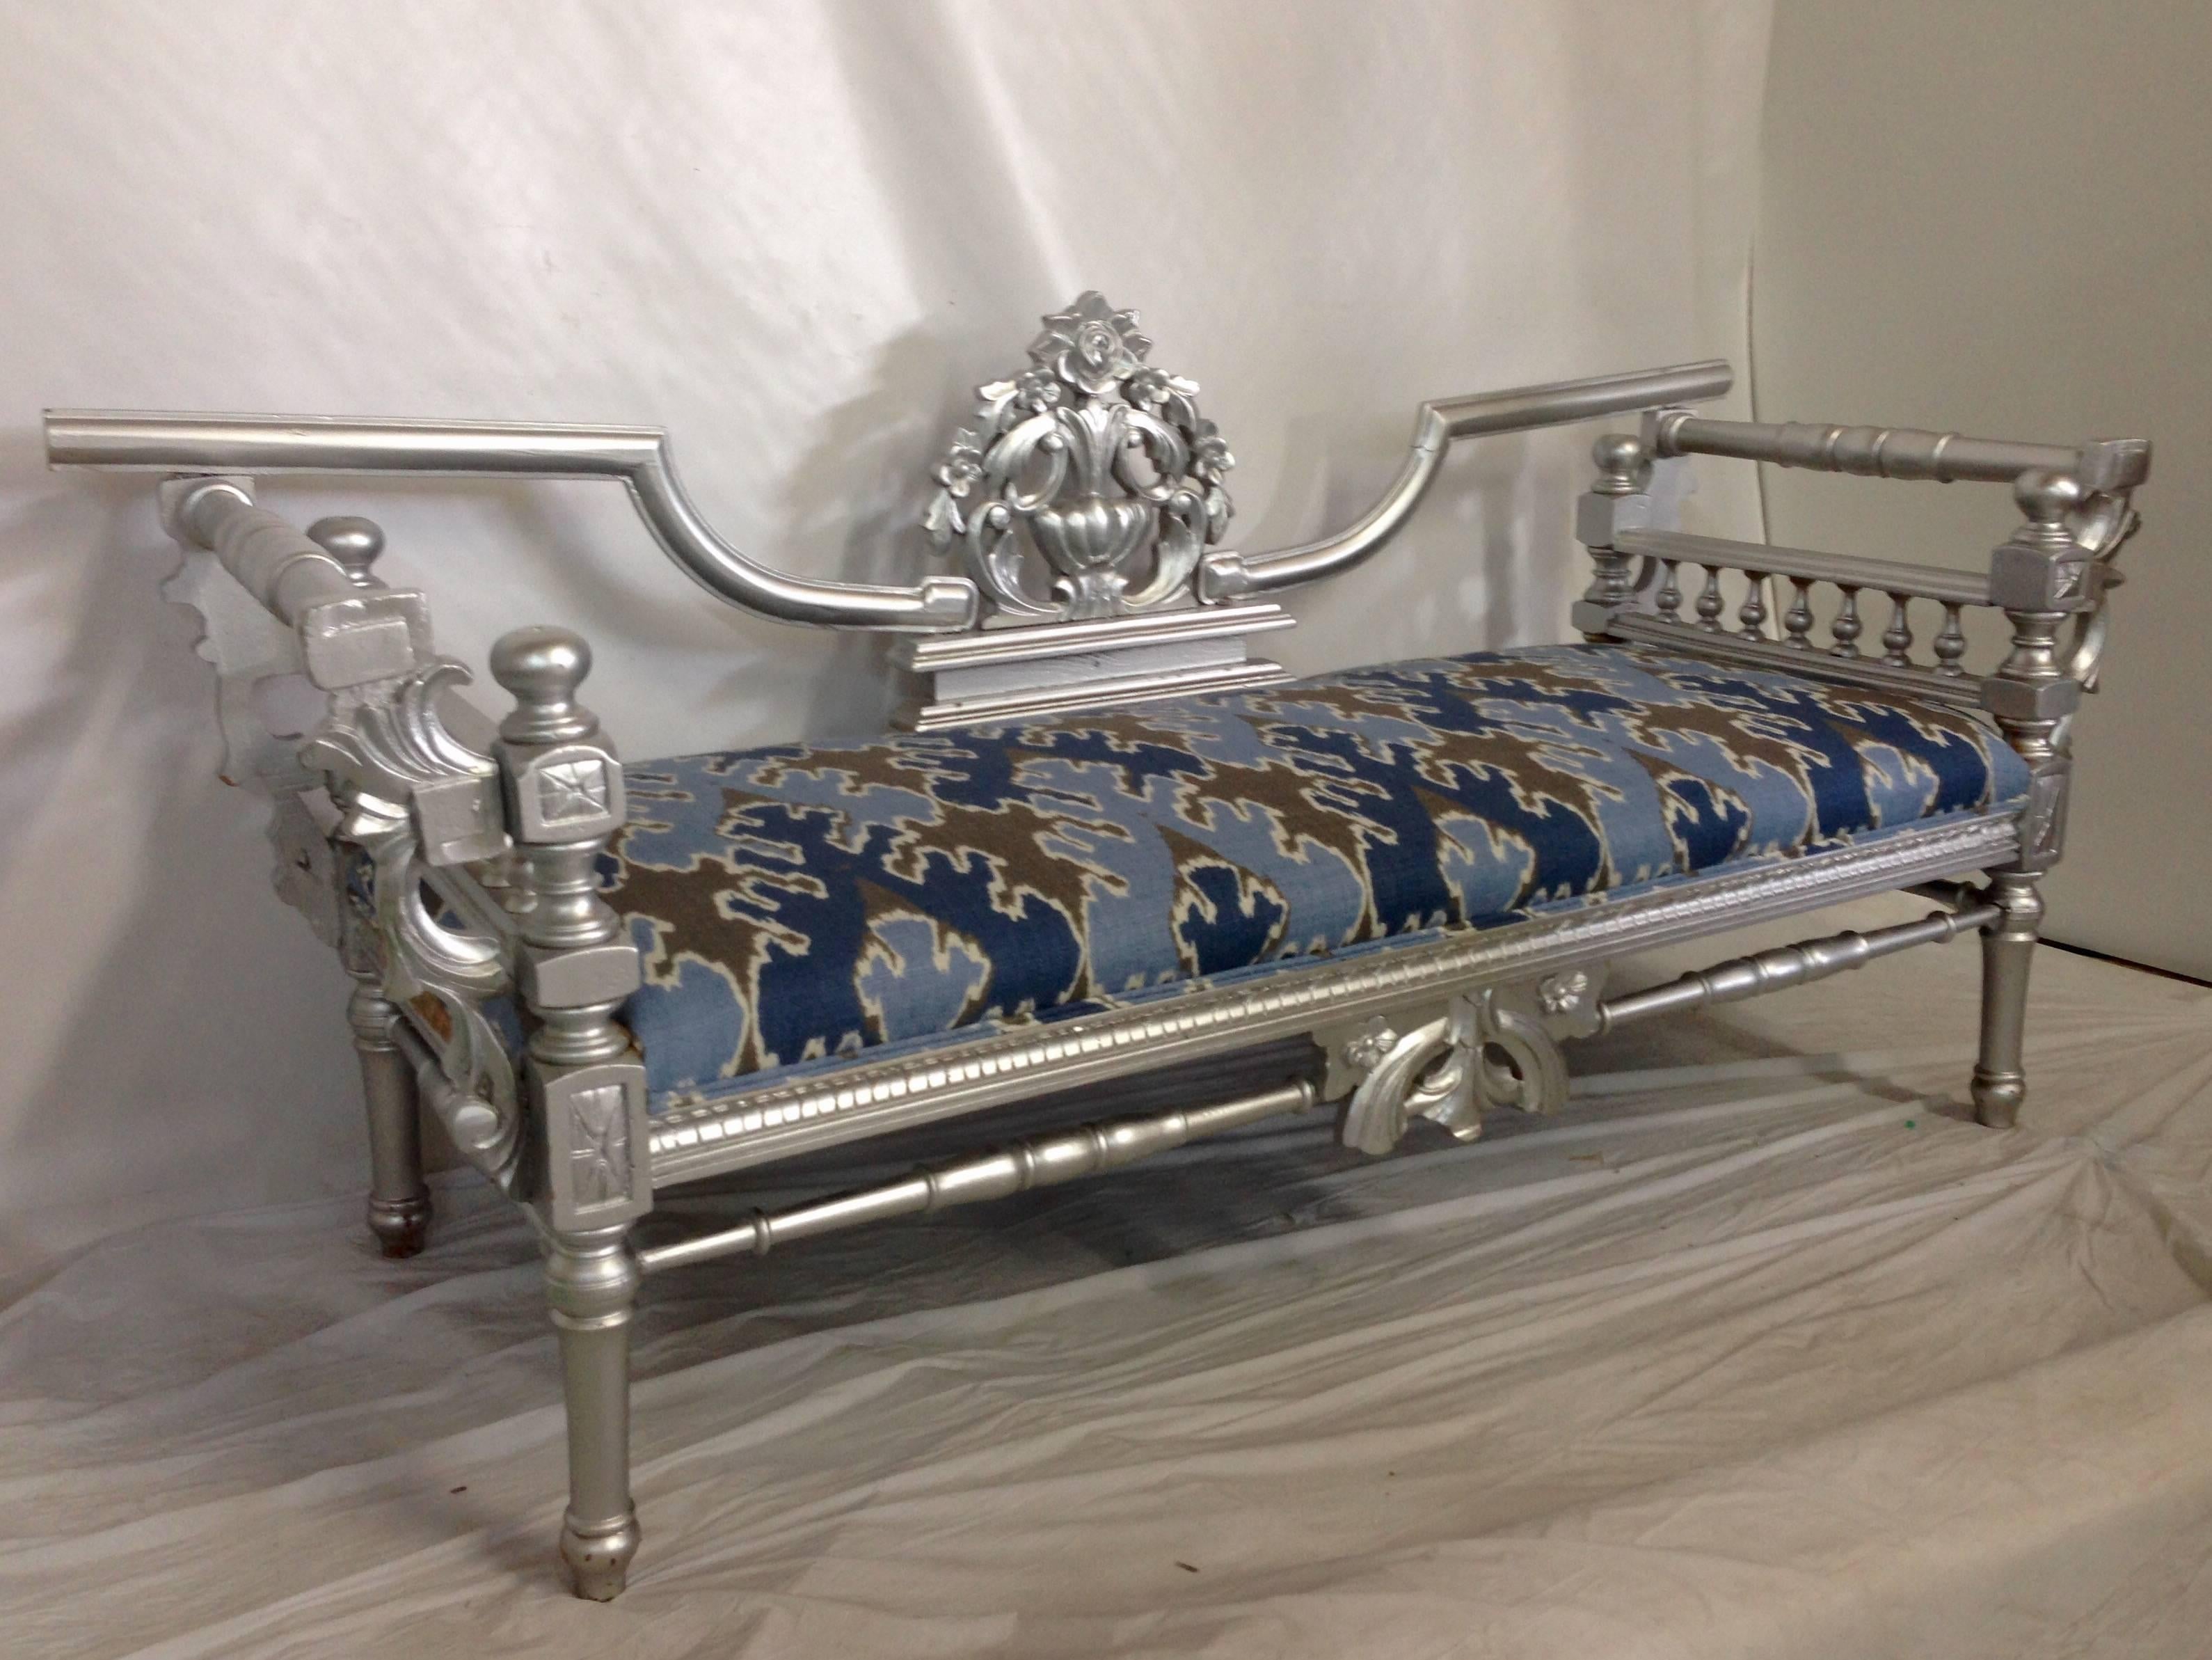 Early 20th Century newly upholstered carved wood lacquered metallic silver   daybed. New Ikat blue, periwinkle, grey and white linen fabric, designed by famed interior designer Kelly Wearstler for Lee Joffa. Heavily decorated rose and wreath motif